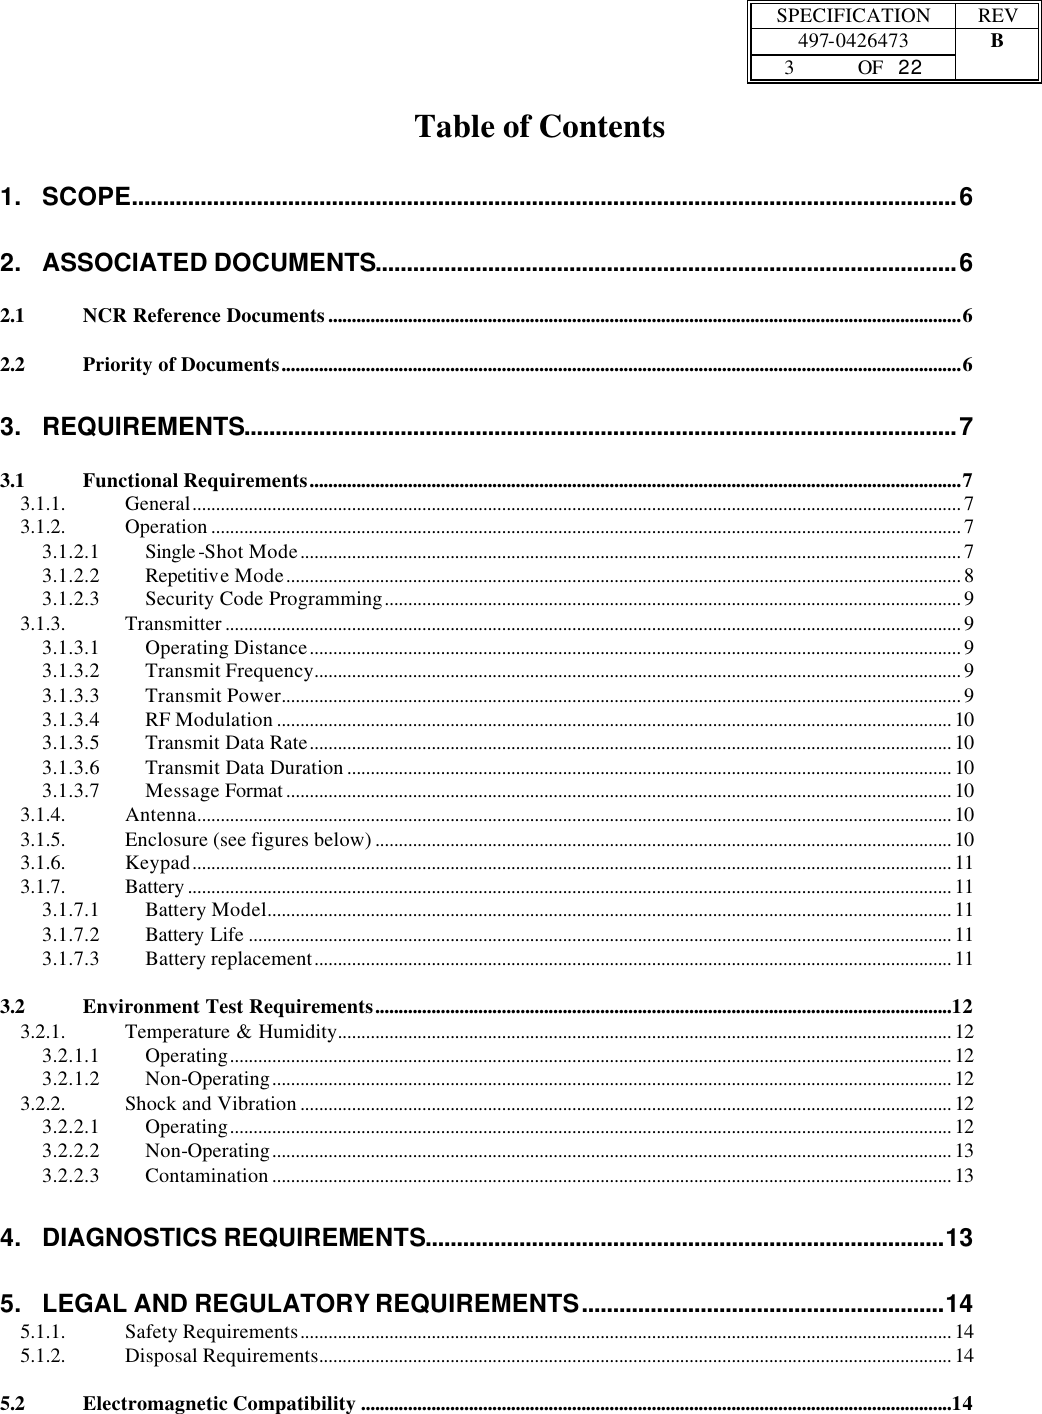  SPECIFICATION REV  497-0426473 B  3 OF   22    Table of Contents 1. SCOPE....................................................................................................................................6 2. ASSOCIATED DOCUMENTS.............................................................................................6 2.1 NCR Reference Documents.......................................................................................................................................6 2.2 Priority of Documents.................................................................................................................................................6 3. REQUIREMENTS..................................................................................................................7 3.1 Functional Requirements...........................................................................................................................................7 3.1.1. General.................................................................................................................................................................... 7 3.1.2. Operation ................................................................................................................................................................ 7 3.1.2.1 Single -Shot Mode............................................................................................................................................. 7 3.1.2.2 Repetitive Mode................................................................................................................................................ 8 3.1.2.3 Security Code Programming........................................................................................................................... 9 3.1.3. Transmitter ............................................................................................................................................................. 9 3.1.3.1 Operating Distance........................................................................................................................................... 9 3.1.3.2 Transmit Frequency.......................................................................................................................................... 9 3.1.3.3 Transmit Power................................................................................................................................................. 9 3.1.3.4 RF Modulation ................................................................................................................................................ 10 3.1.3.5 Transmit Data Rate......................................................................................................................................... 10 3.1.3.6 Transmit Data Duration ................................................................................................................................. 10 3.1.3.7 Message Format .............................................................................................................................................. 10 3.1.4. Antenna................................................................................................................................................................. 10 3.1.5. Enclosure (see figures below) ........................................................................................................................... 10 3.1.6. Keypad.................................................................................................................................................................. 11 3.1.7. Battery ................................................................................................................................................................... 11 3.1.7.1 Battery Model.................................................................................................................................................. 11 3.1.7.2 Battery Life ...................................................................................................................................................... 11 3.1.7.3 Battery replacement........................................................................................................................................ 11 3.2 Environment Test Requirements...........................................................................................................................12 3.2.1. Temperature &amp; Humidity................................................................................................................................... 12 3.2.1.1 Operating.......................................................................................................................................................... 12 3.2.1.2 Non-Operating................................................................................................................................................. 12 3.2.2. Shock and Vibration ........................................................................................................................................... 12 3.2.2.1 Operating.......................................................................................................................................................... 12 3.2.2.2 Non-Operating................................................................................................................................................. 13 3.2.2.3 Contamination ................................................................................................................................................. 13 4. DIAGNOSTICS REQUIREMENTS...................................................................................13 5. LEGAL AND REGULATORY REQUIREMENTS..........................................................14 5.1.1. Safety Requirements........................................................................................................................................... 14 5.1.2. Disposal Requirements....................................................................................................................................... 14 5.2 Electromagnetic Compatibility ..............................................................................................................................14 